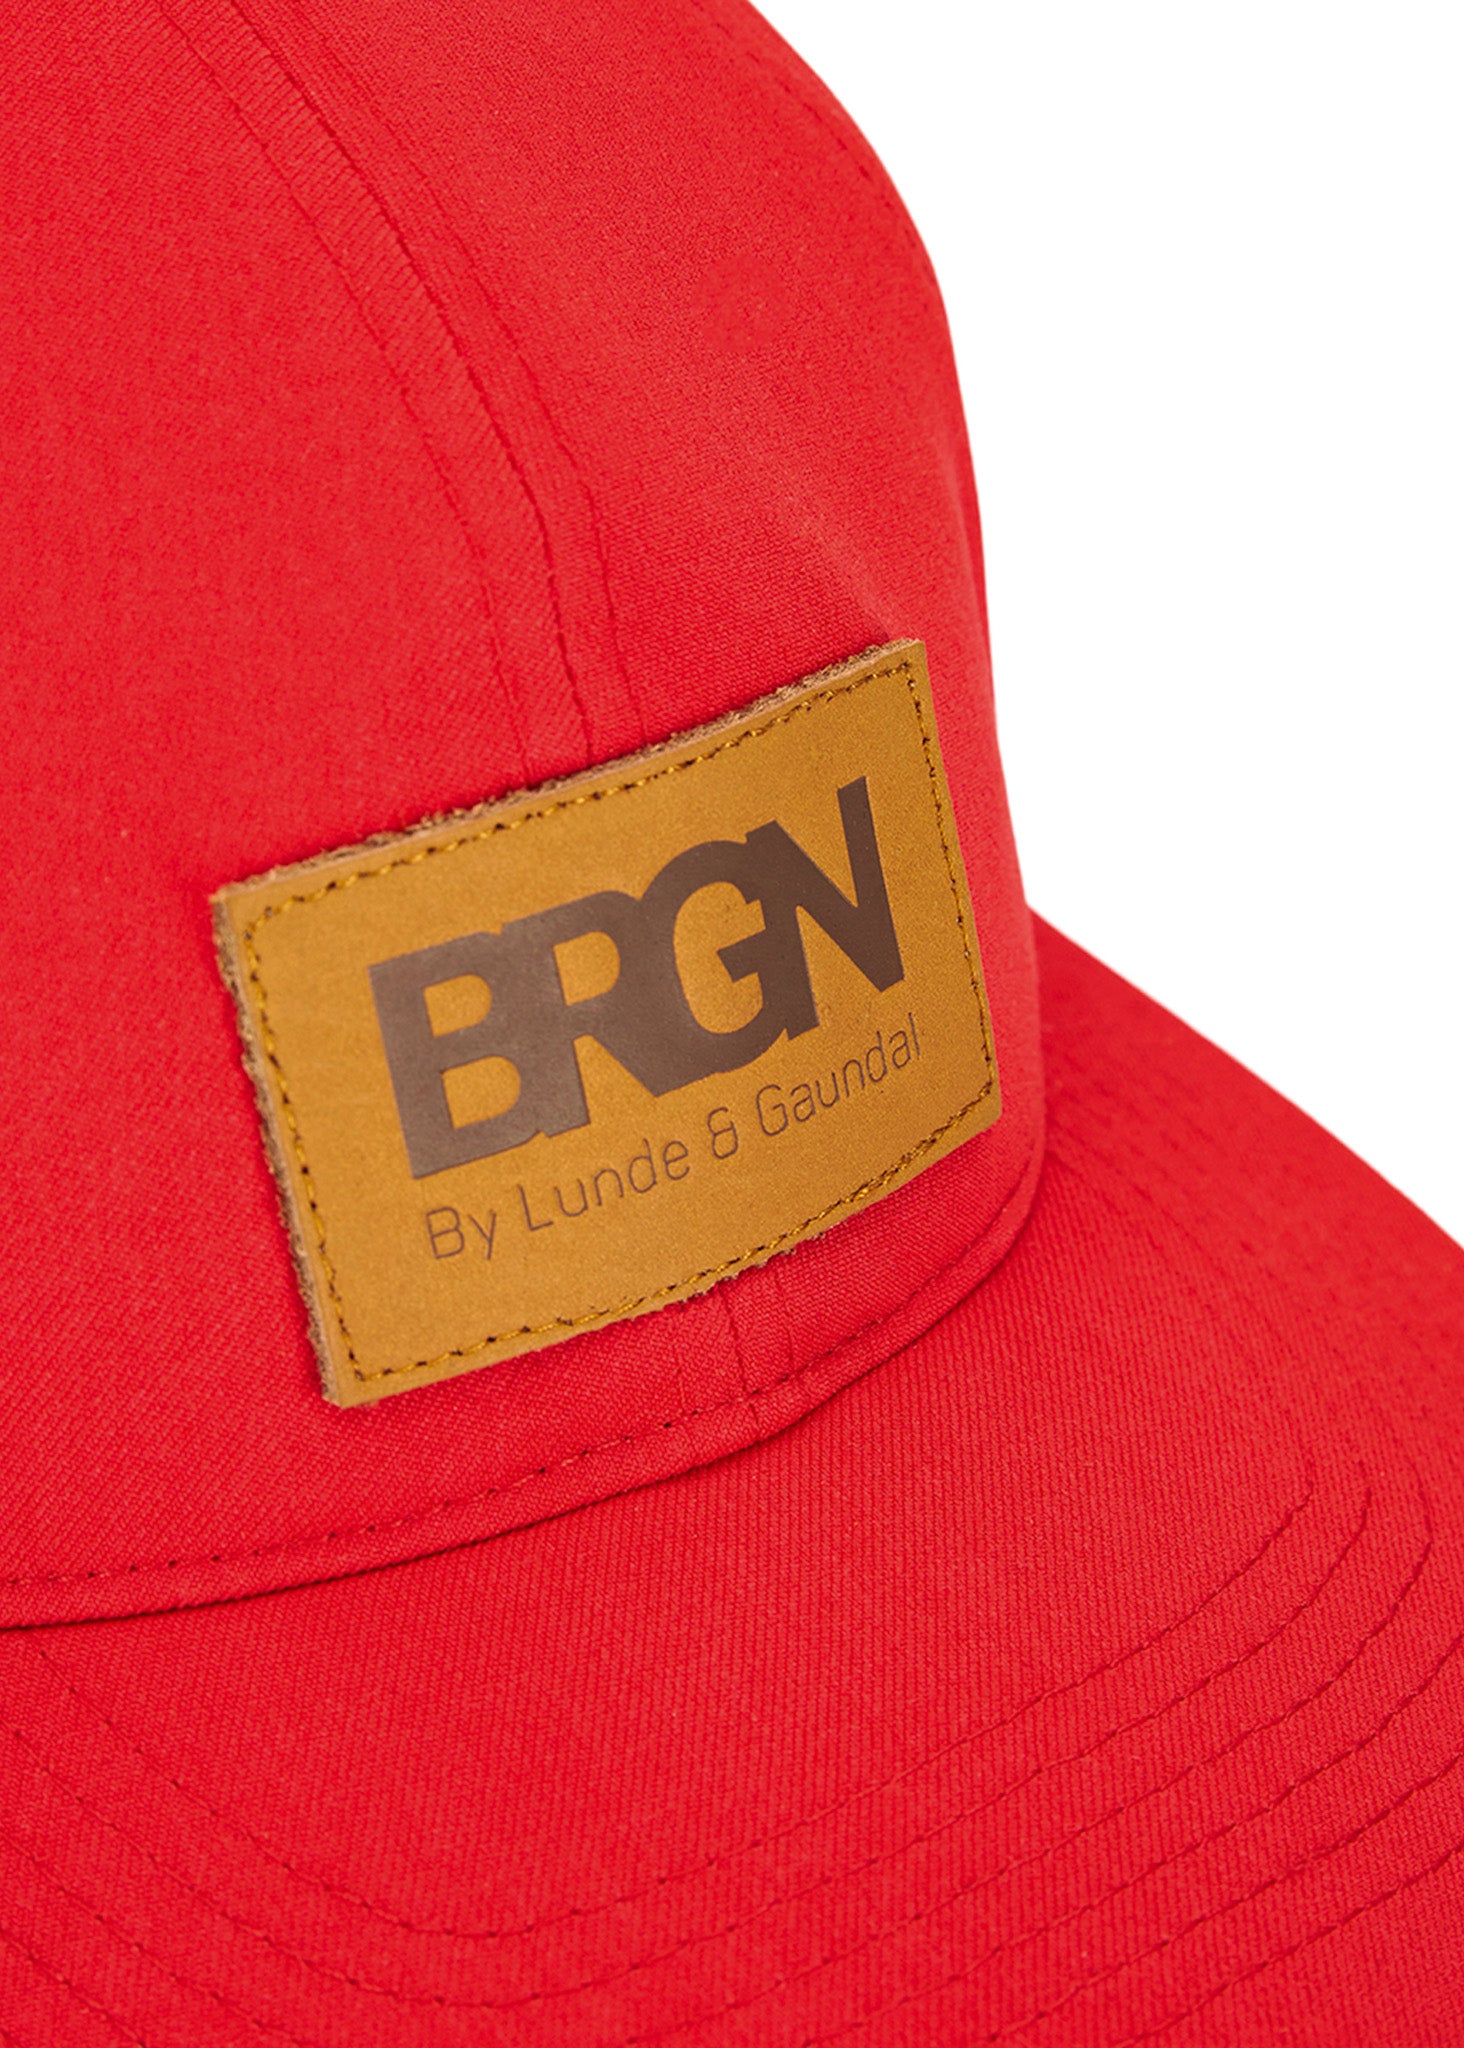 BRGN Solregn caps Accessories 385 Berry Red